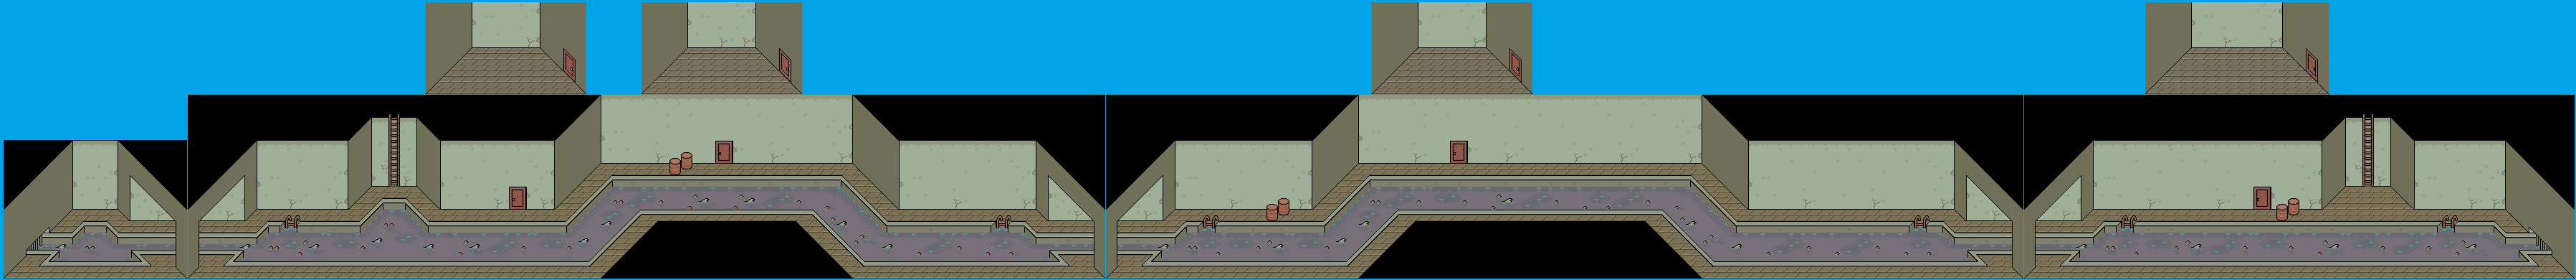 EarthBound / Mother 2 - Fourside Sewers